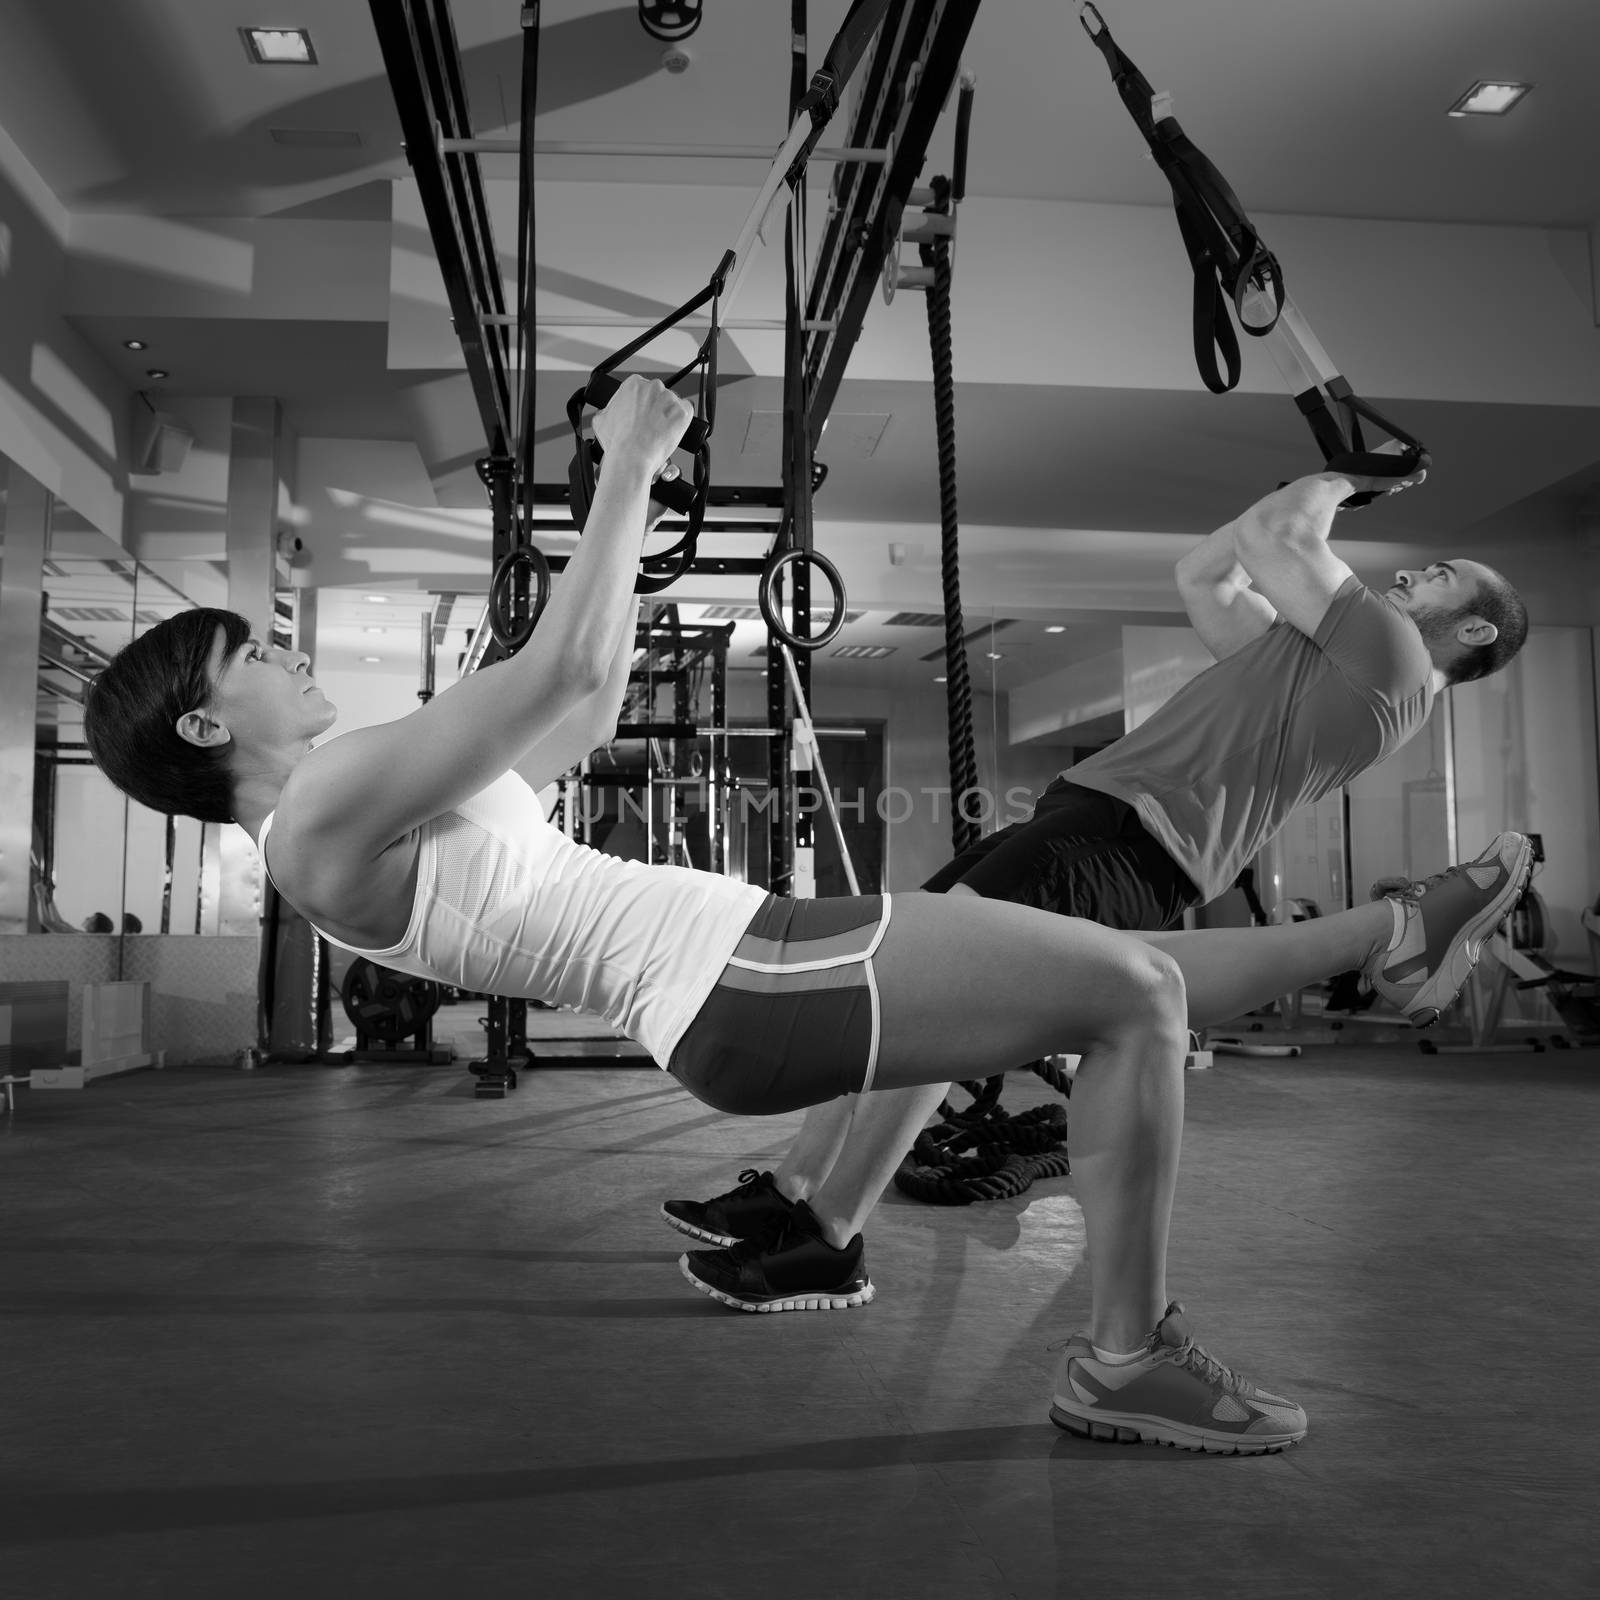 Fitness TRX training exercises at gym woman and man by lunamarina